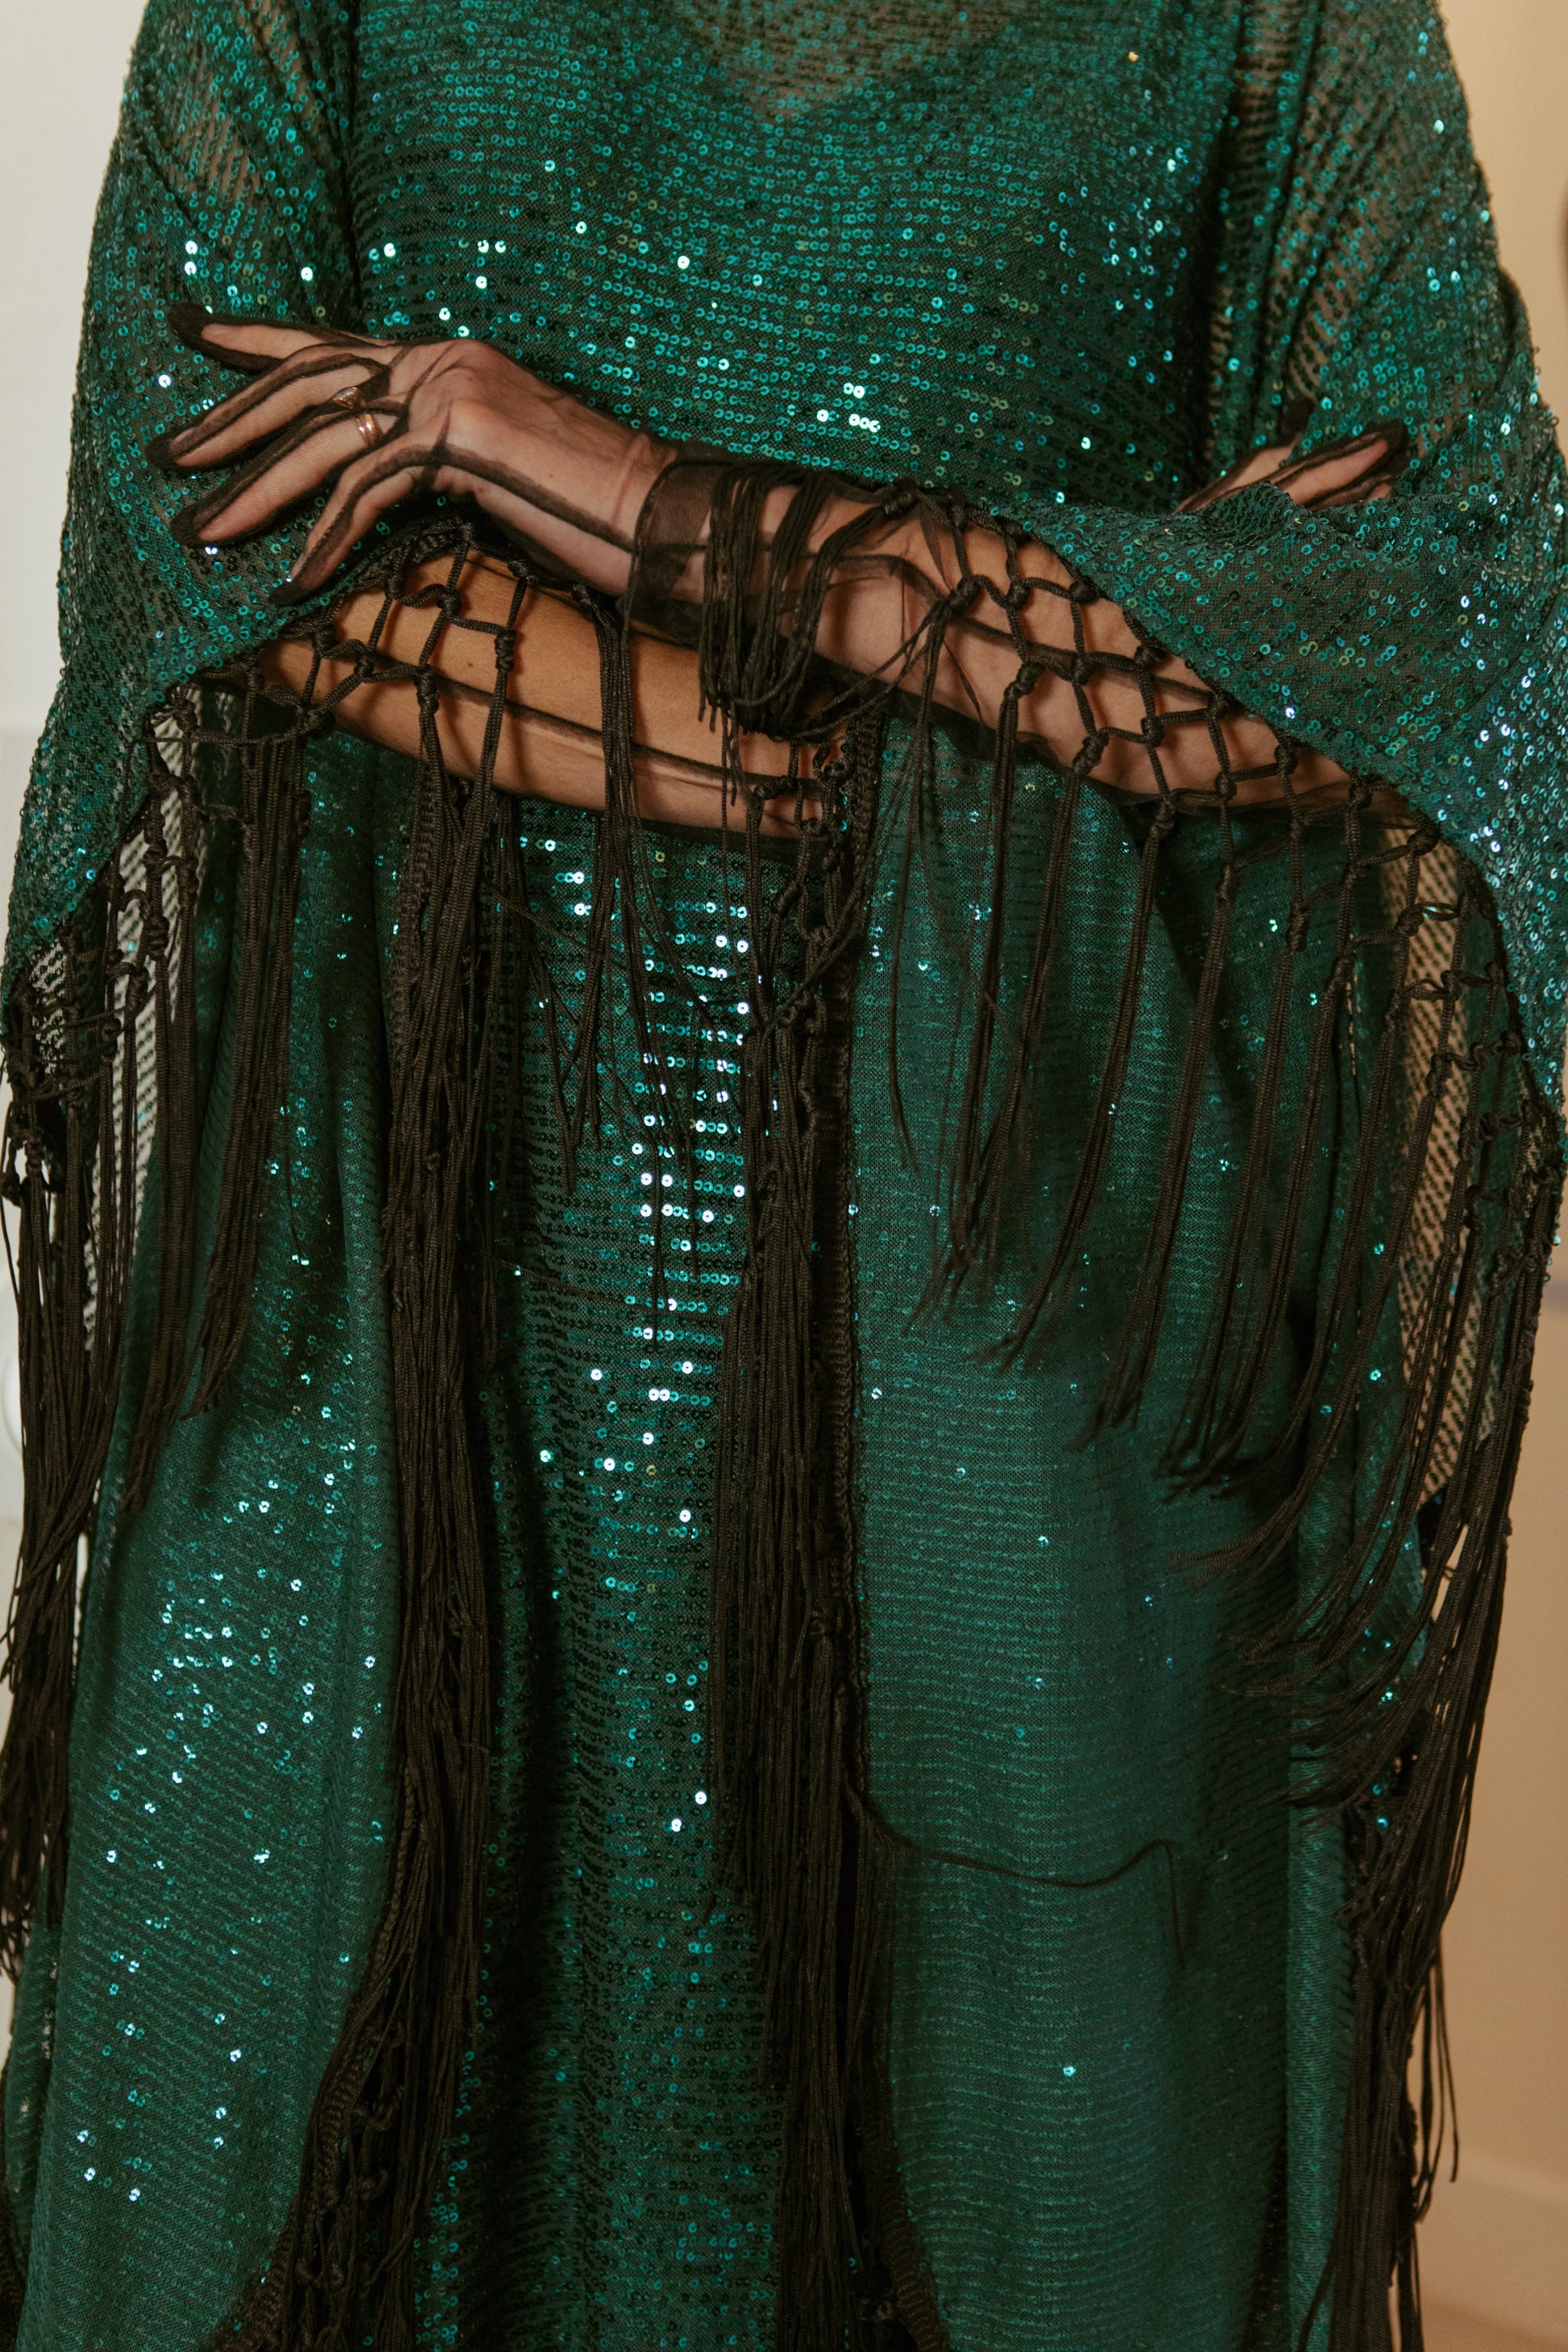 This caftan is a dazzling, full-length garment featuring a shimmering jade green sequin overlay on a mesh fabric. The sequins catch the light, creating a sparkling effect throughout. It has a mock neck collar with a straight, loose fit that drapes elegantly over the body. The edges of the caftan, including the hem and the sides, are embellished with long, silk black fringe that add movement and a playful flair.